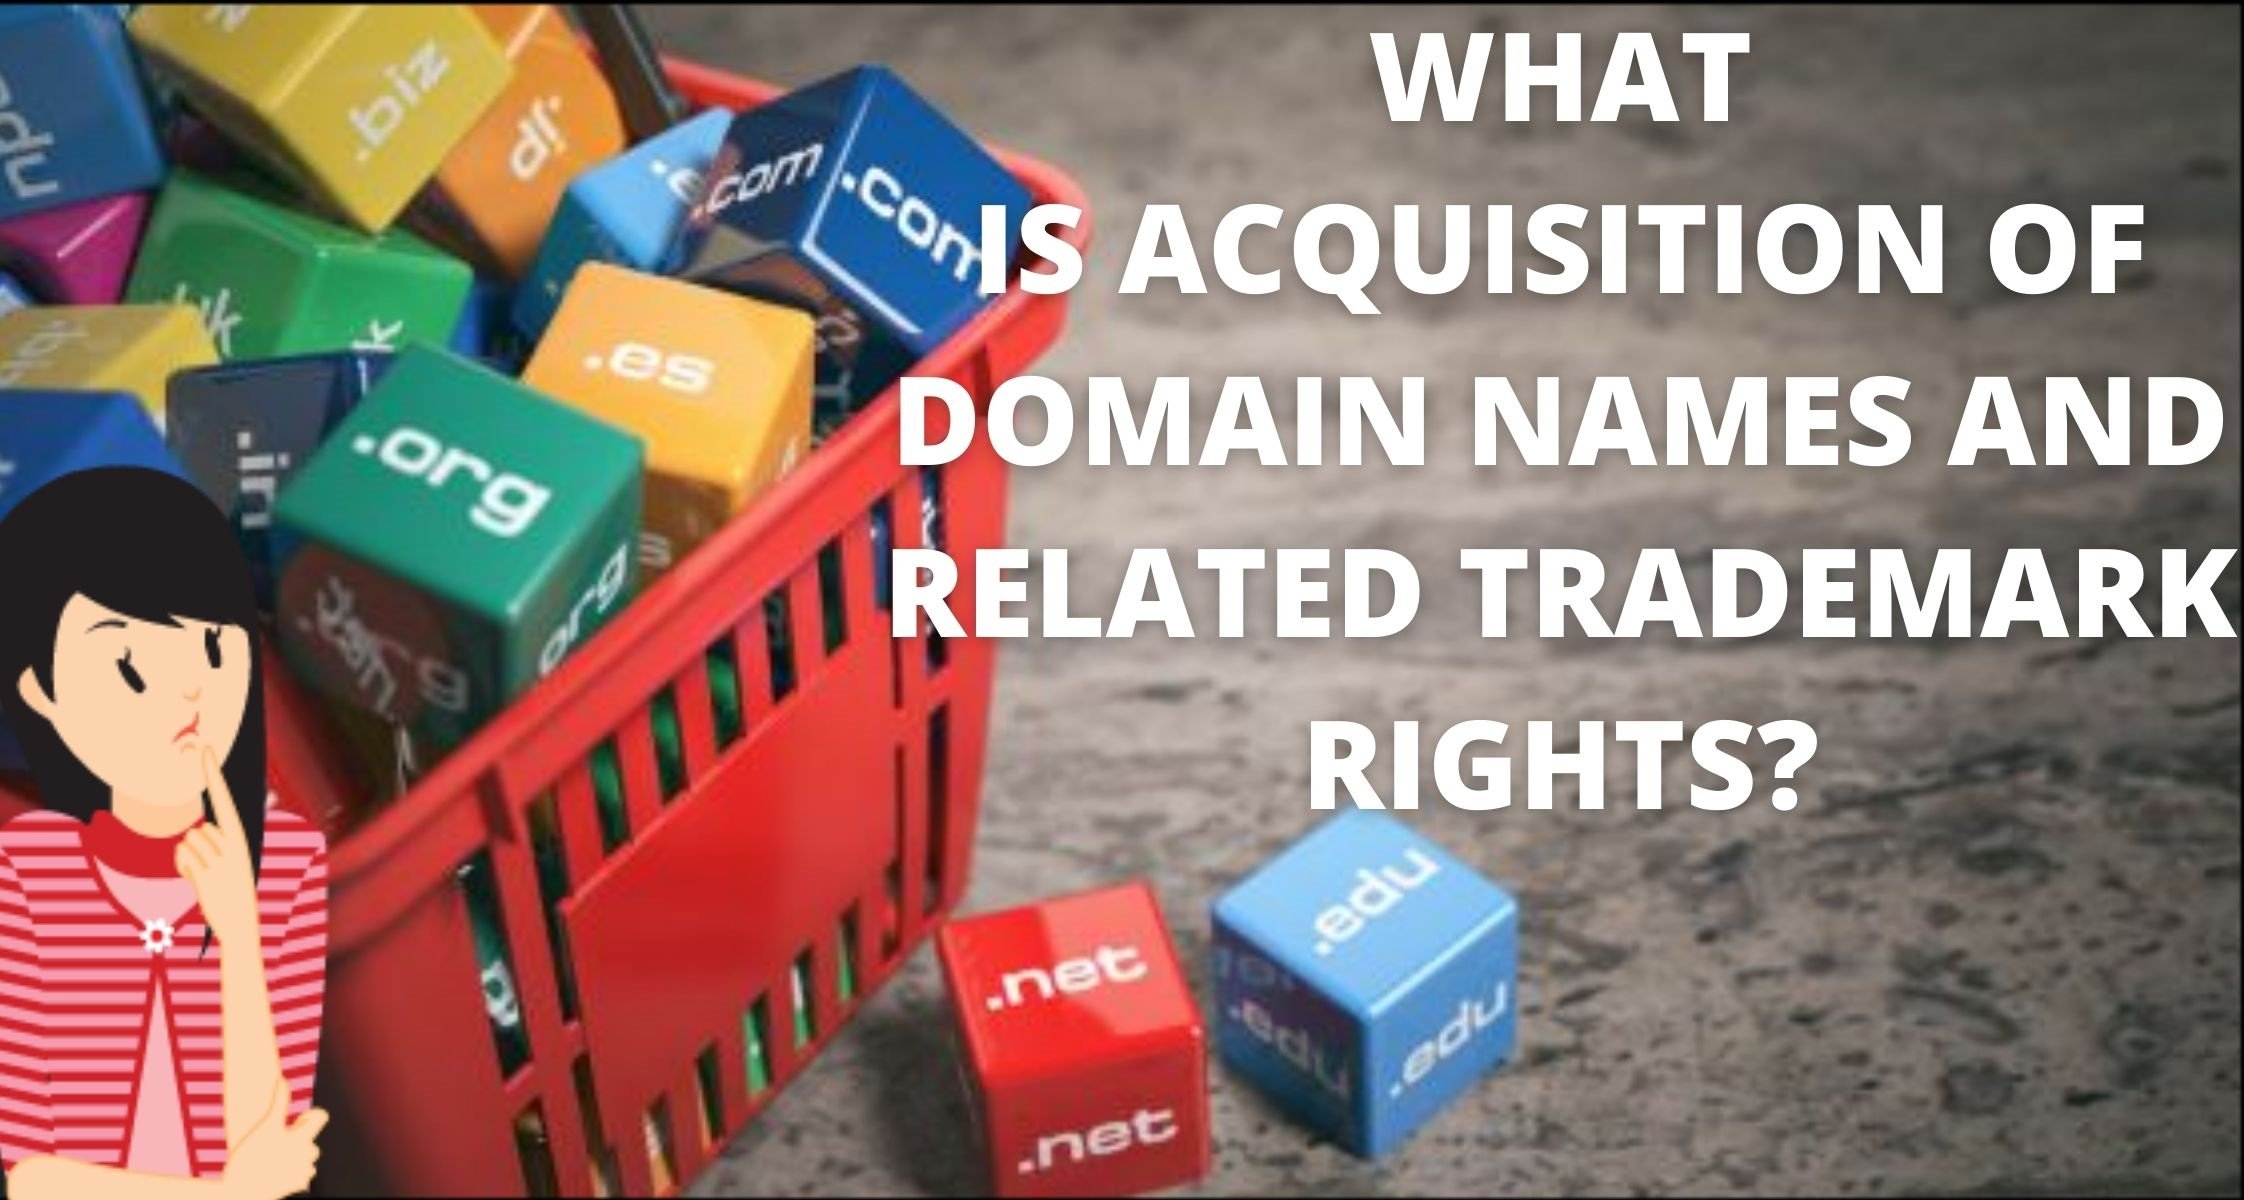 WHAT IS THE ACQUISITION OF DOMAIN NAMES AND RELATED TRADEMARK OR SERVICE MARK RIGHTS?